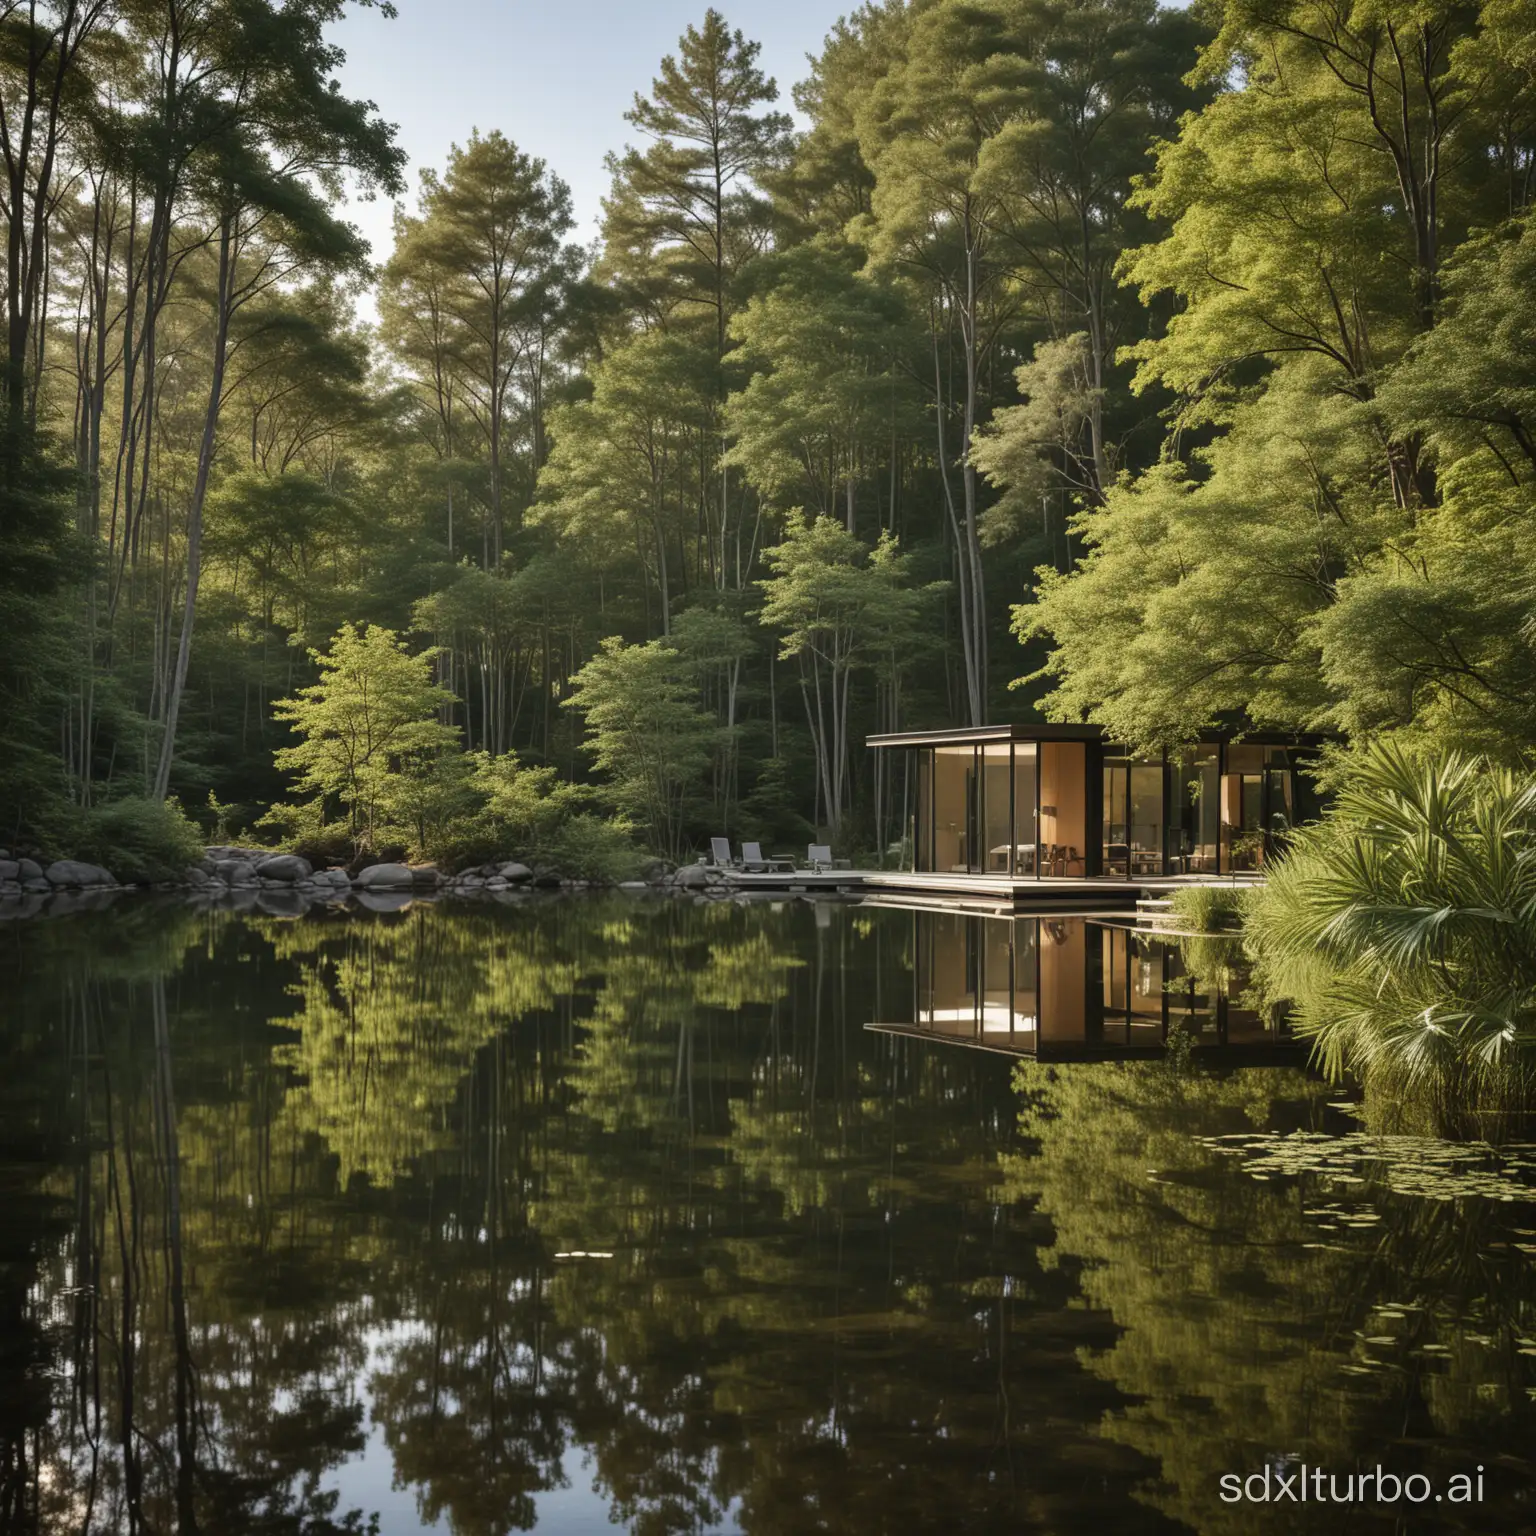 A serene lakeside retreat, where the stillness of the water mirrors the tranquility of the surrounding forest